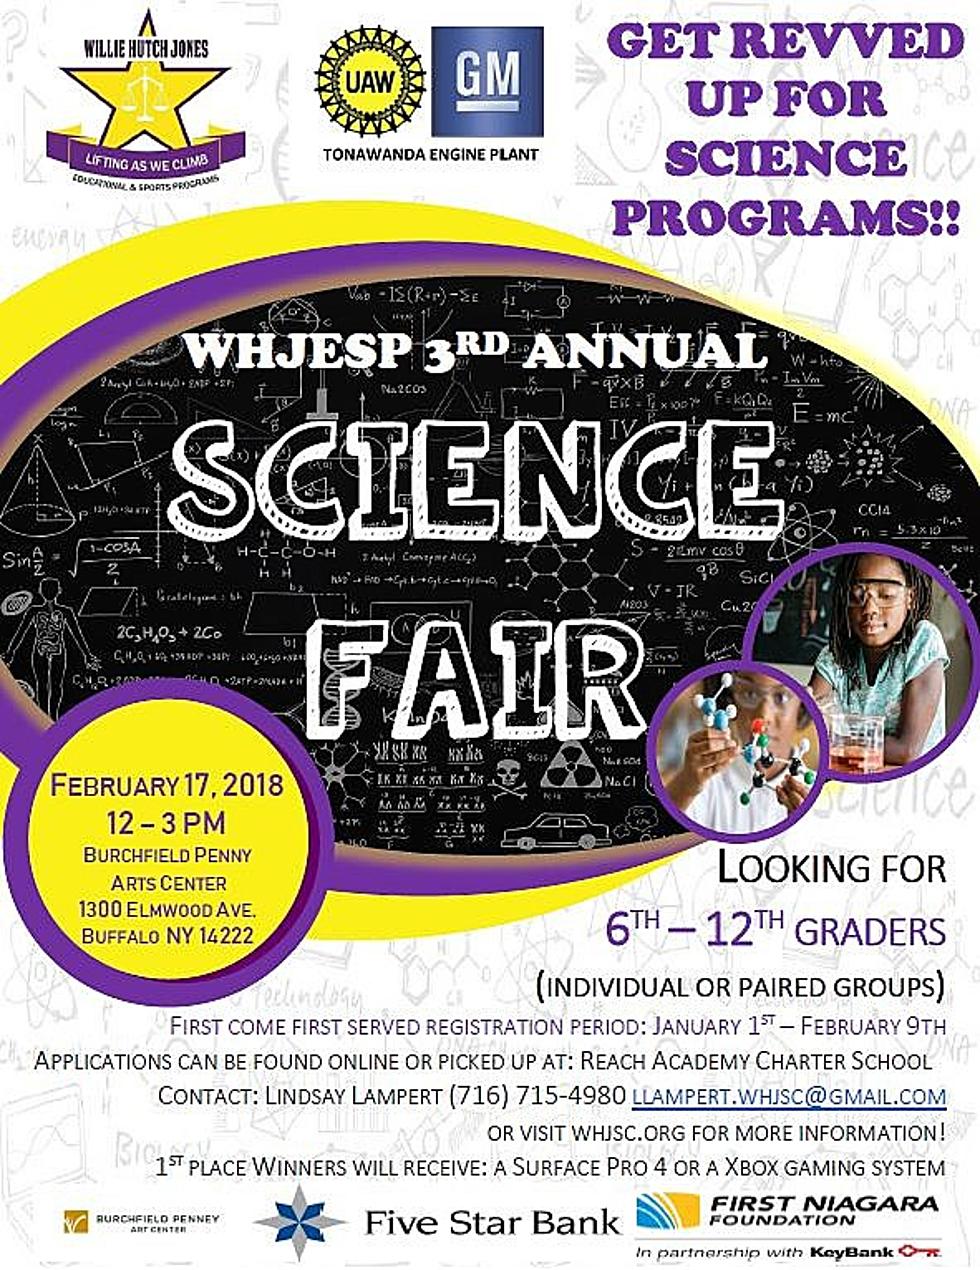 Community: Willie Hutch Jones is Looking for 6th through 12th Graders for Science Fair